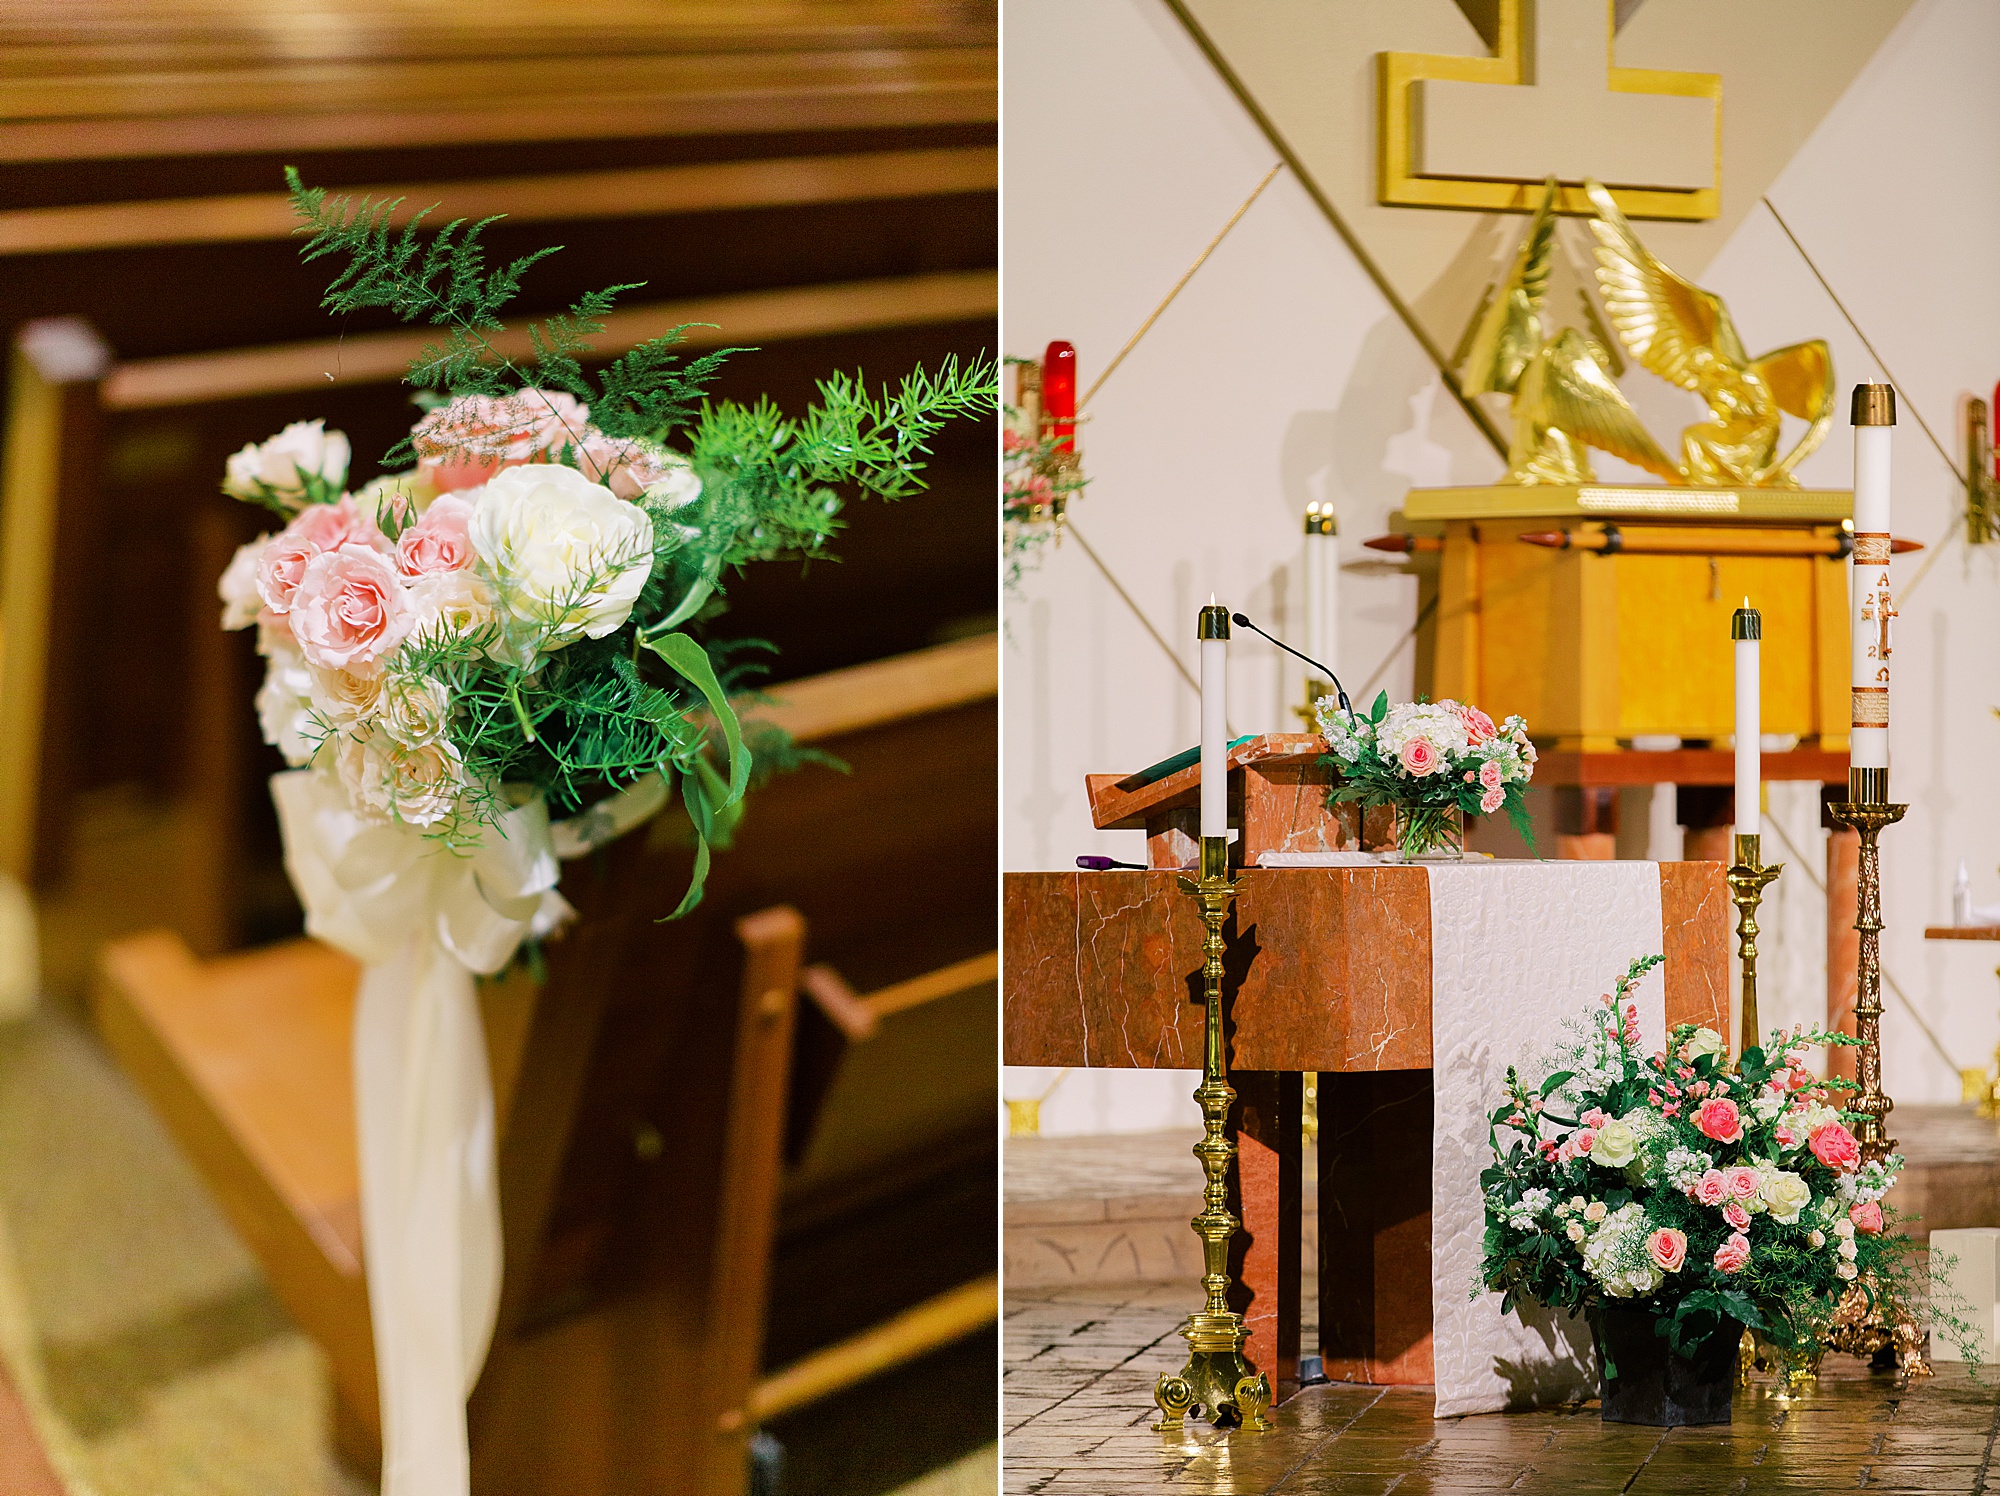 decor along pews for traditional church wedding in Charlotte NC